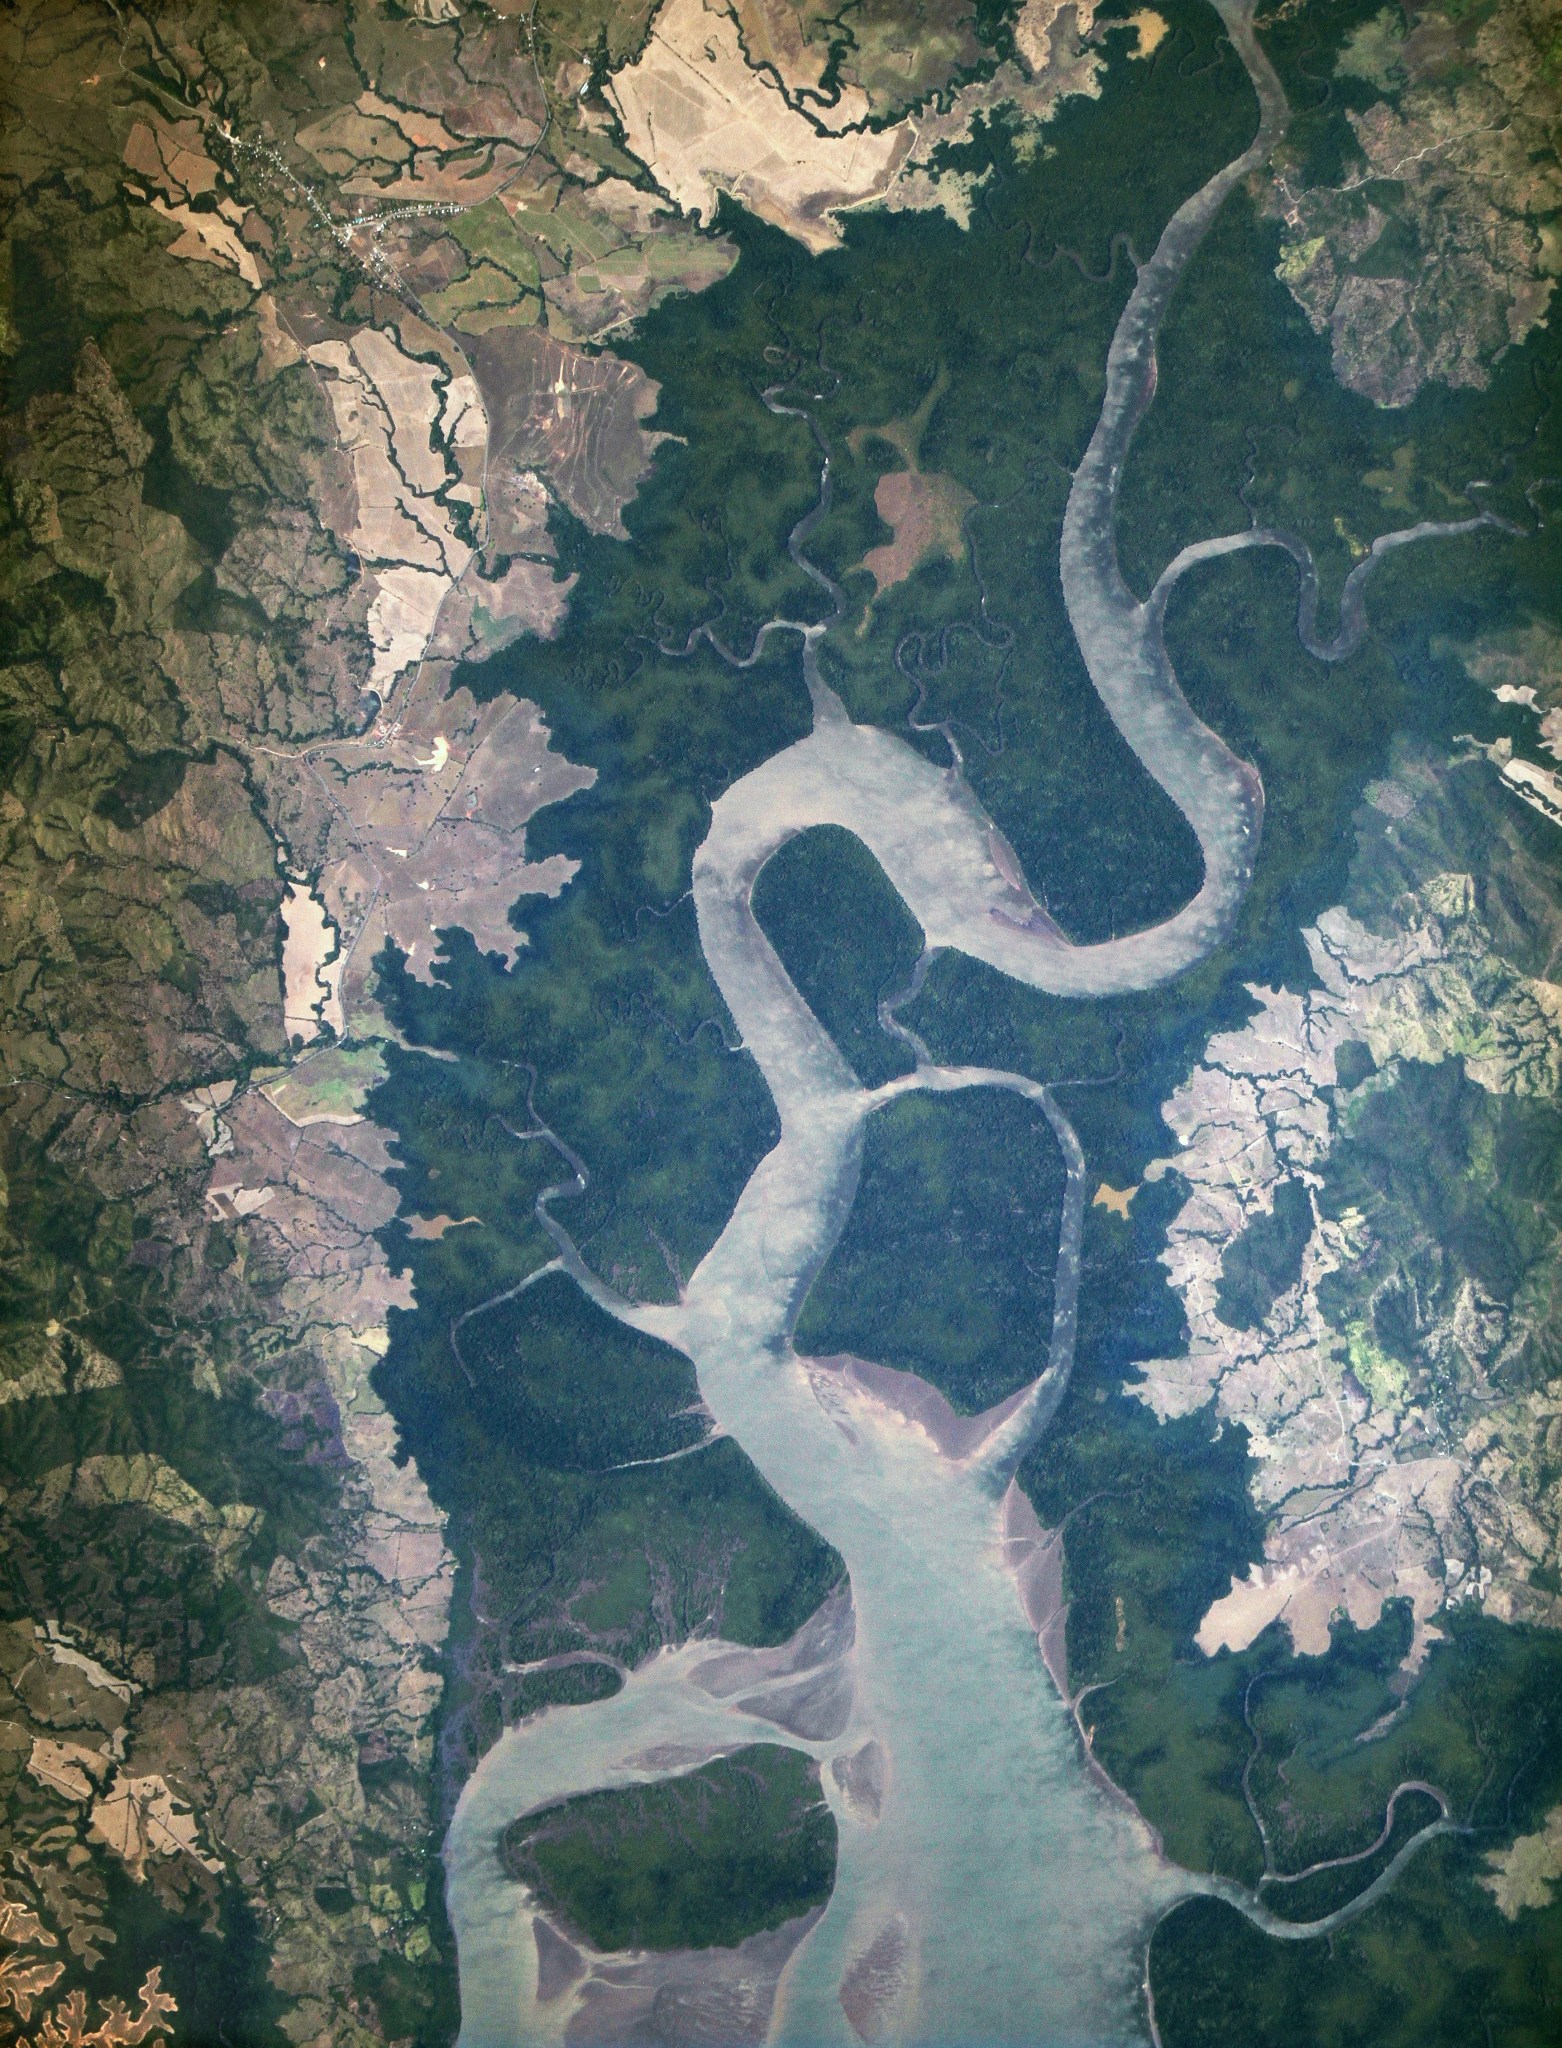 The mouth of the Rio San Pablo in Veraguas, Panama, as it empties into the Gulf of Montijo